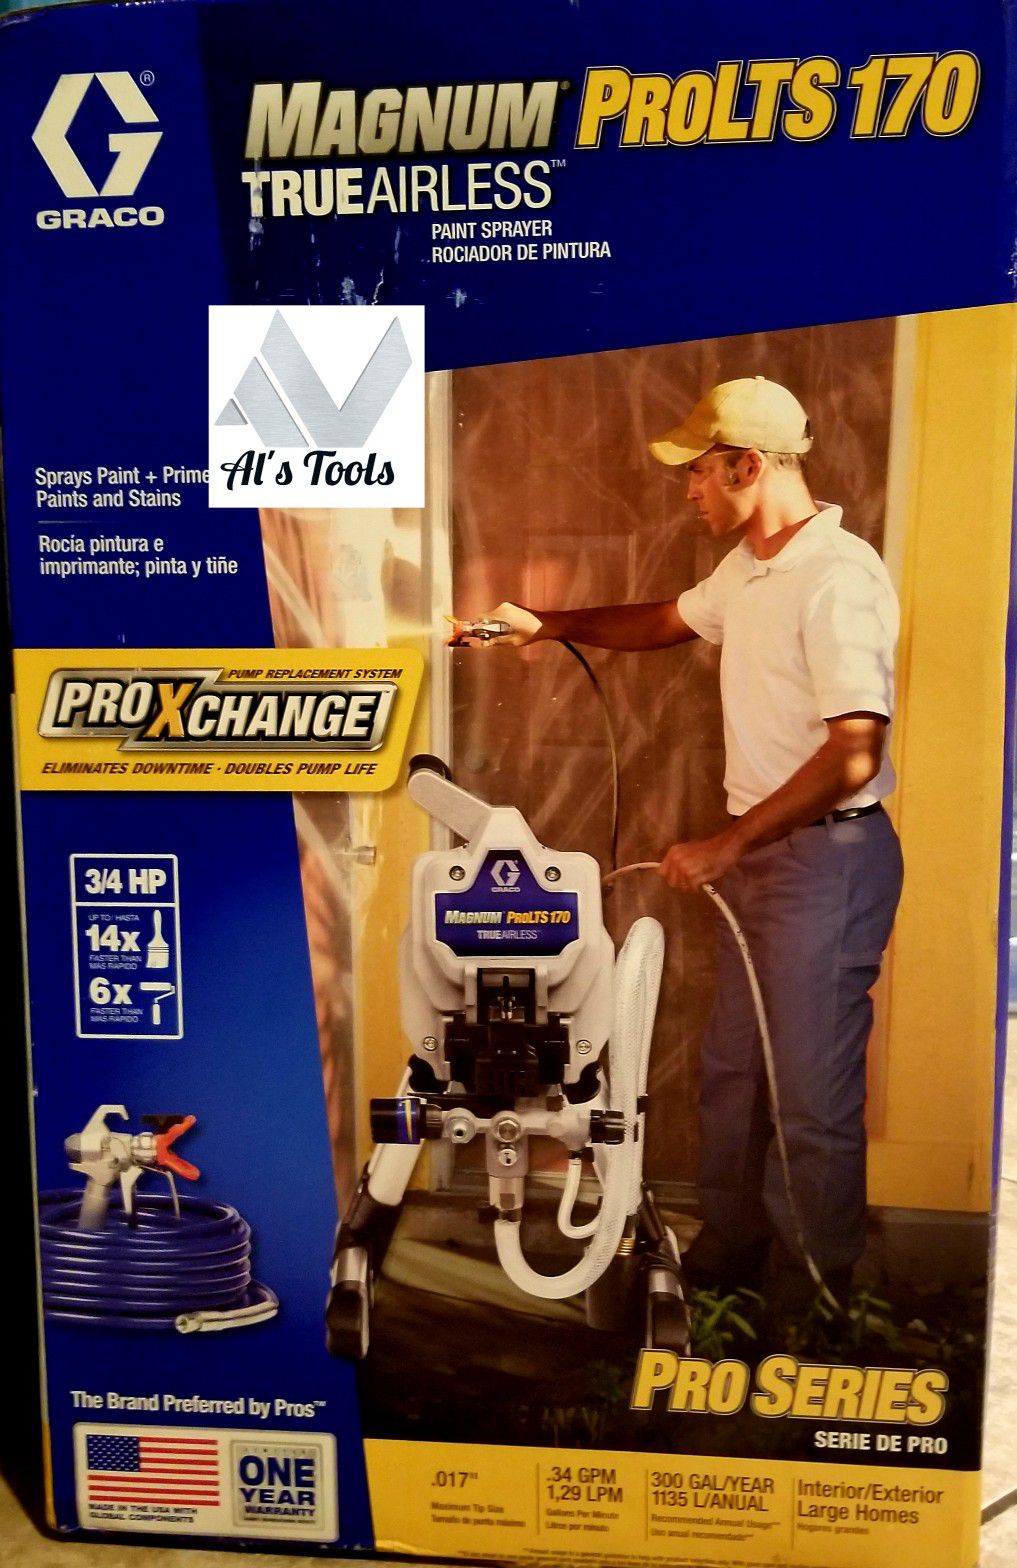 Graco Magnum Pro LTS 170 stand airless paint sprayer